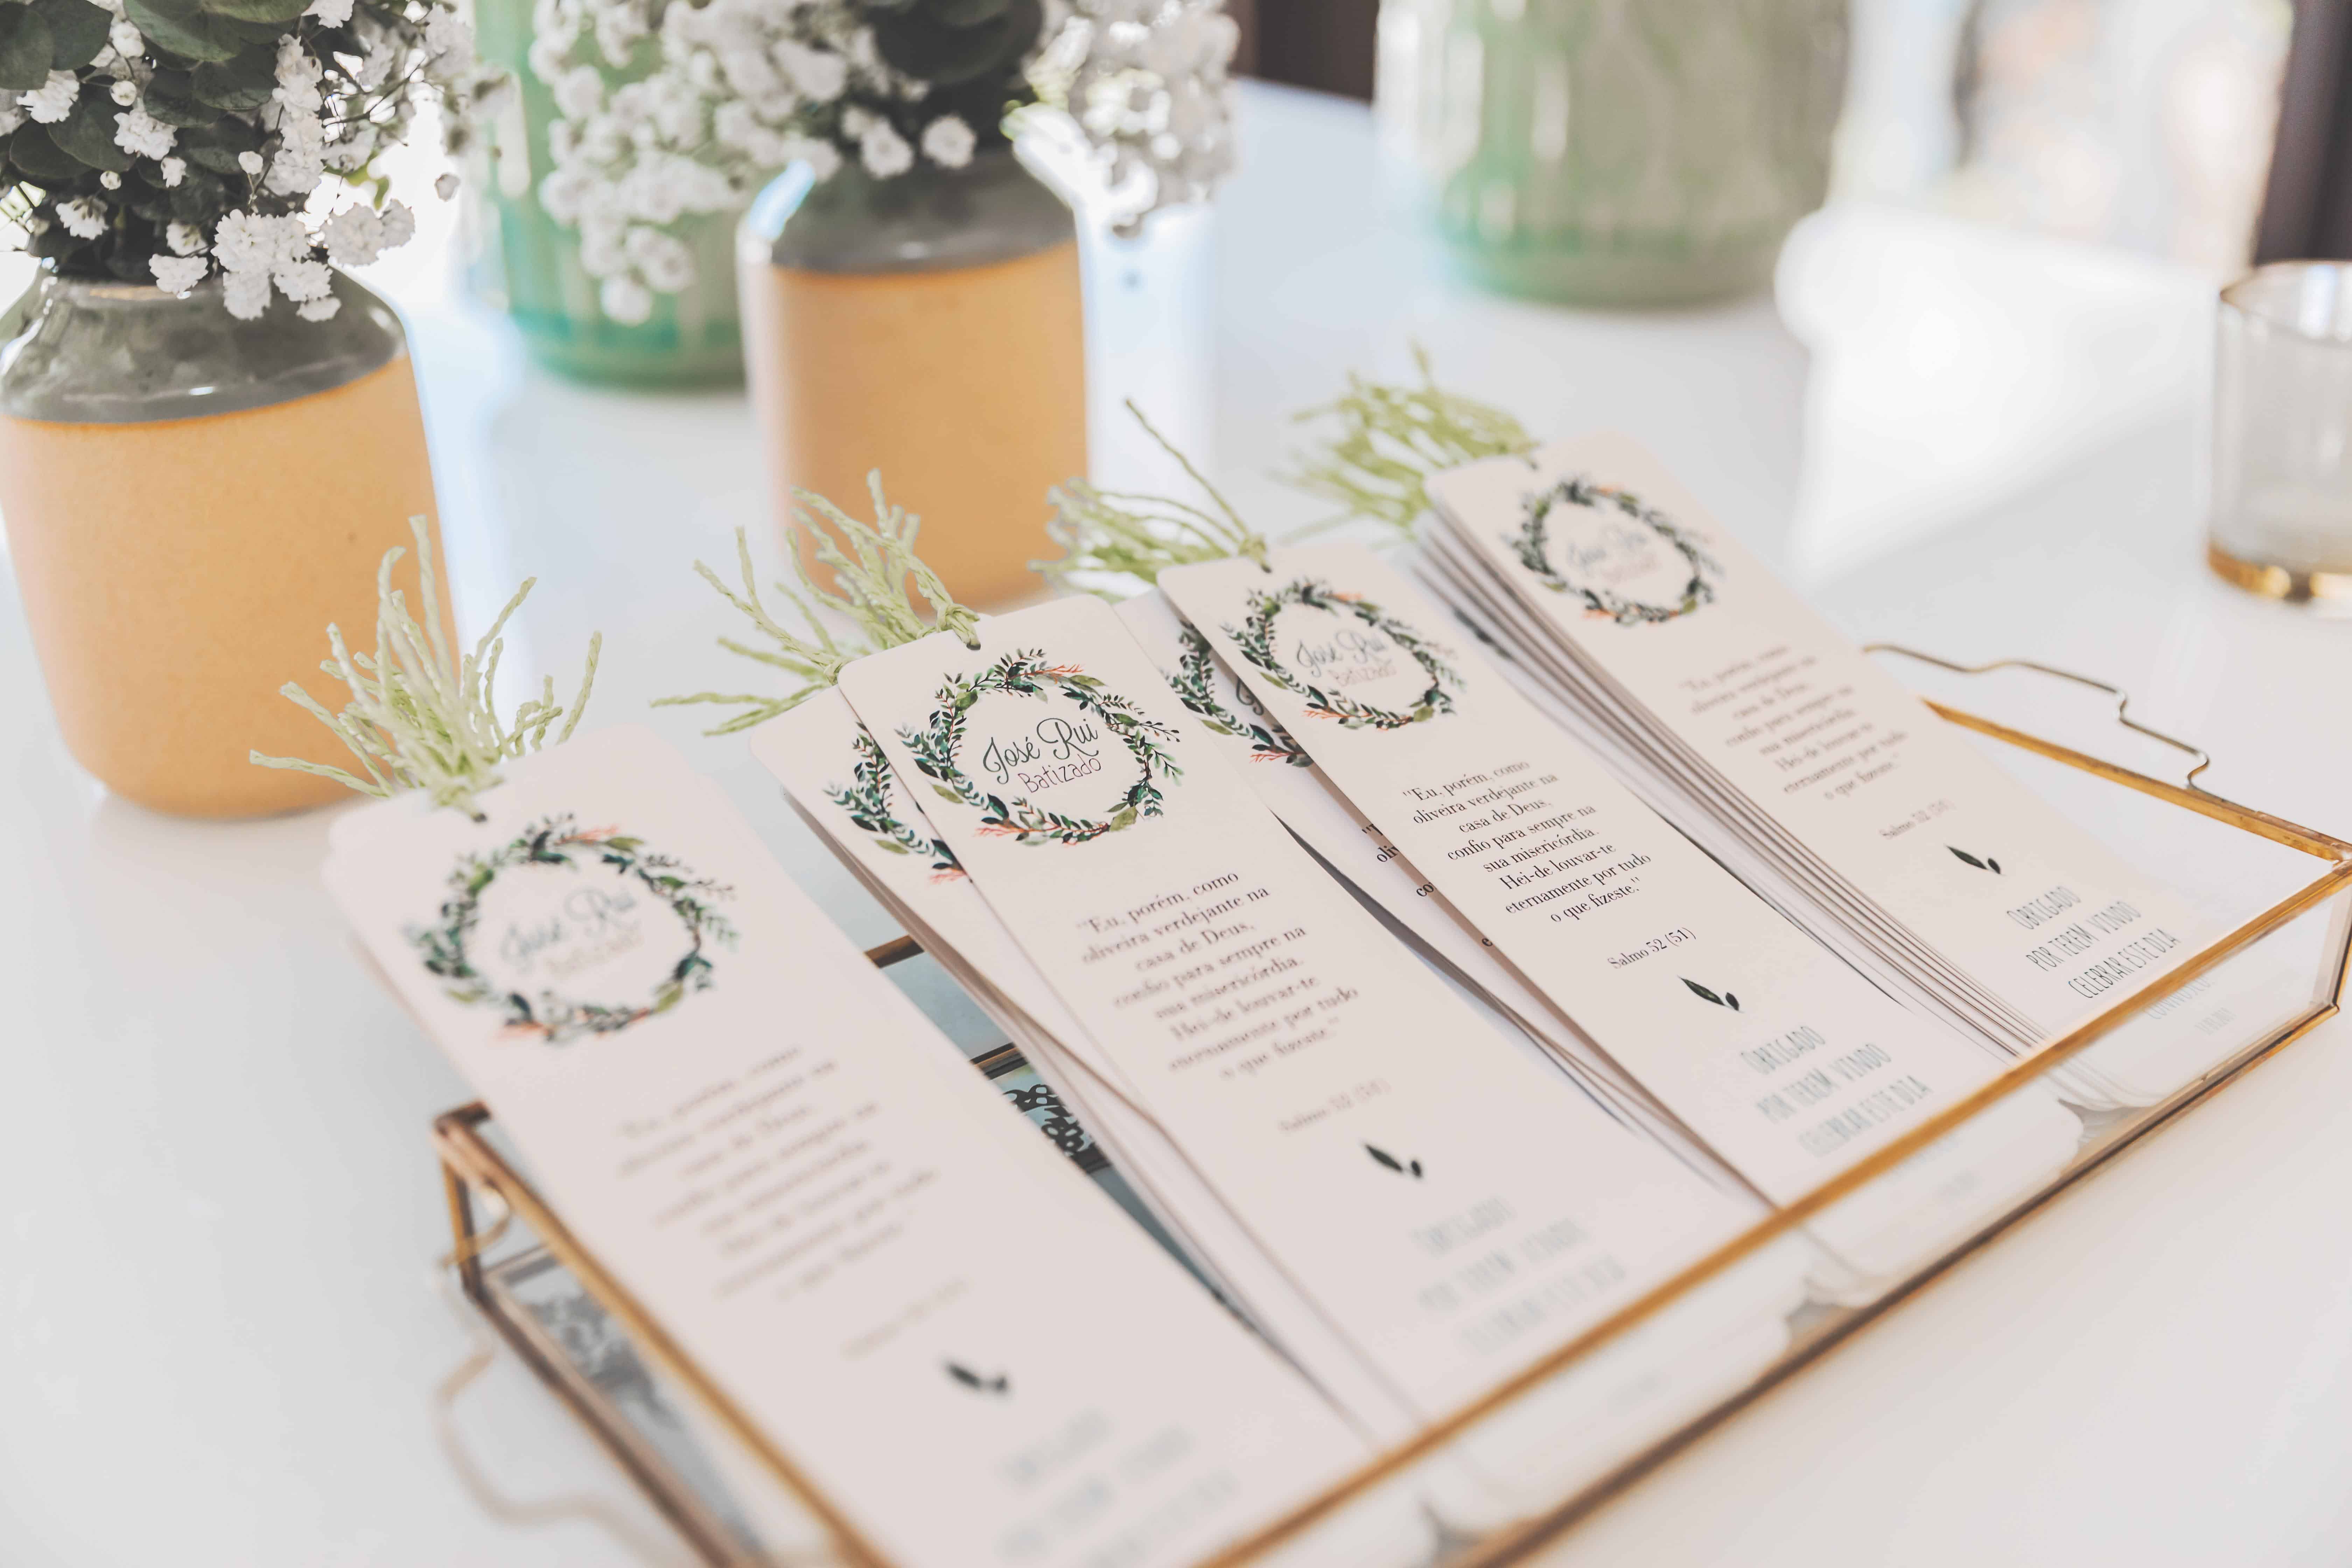  3 Ways to Get Creative with Your Corporate Event Invitations 